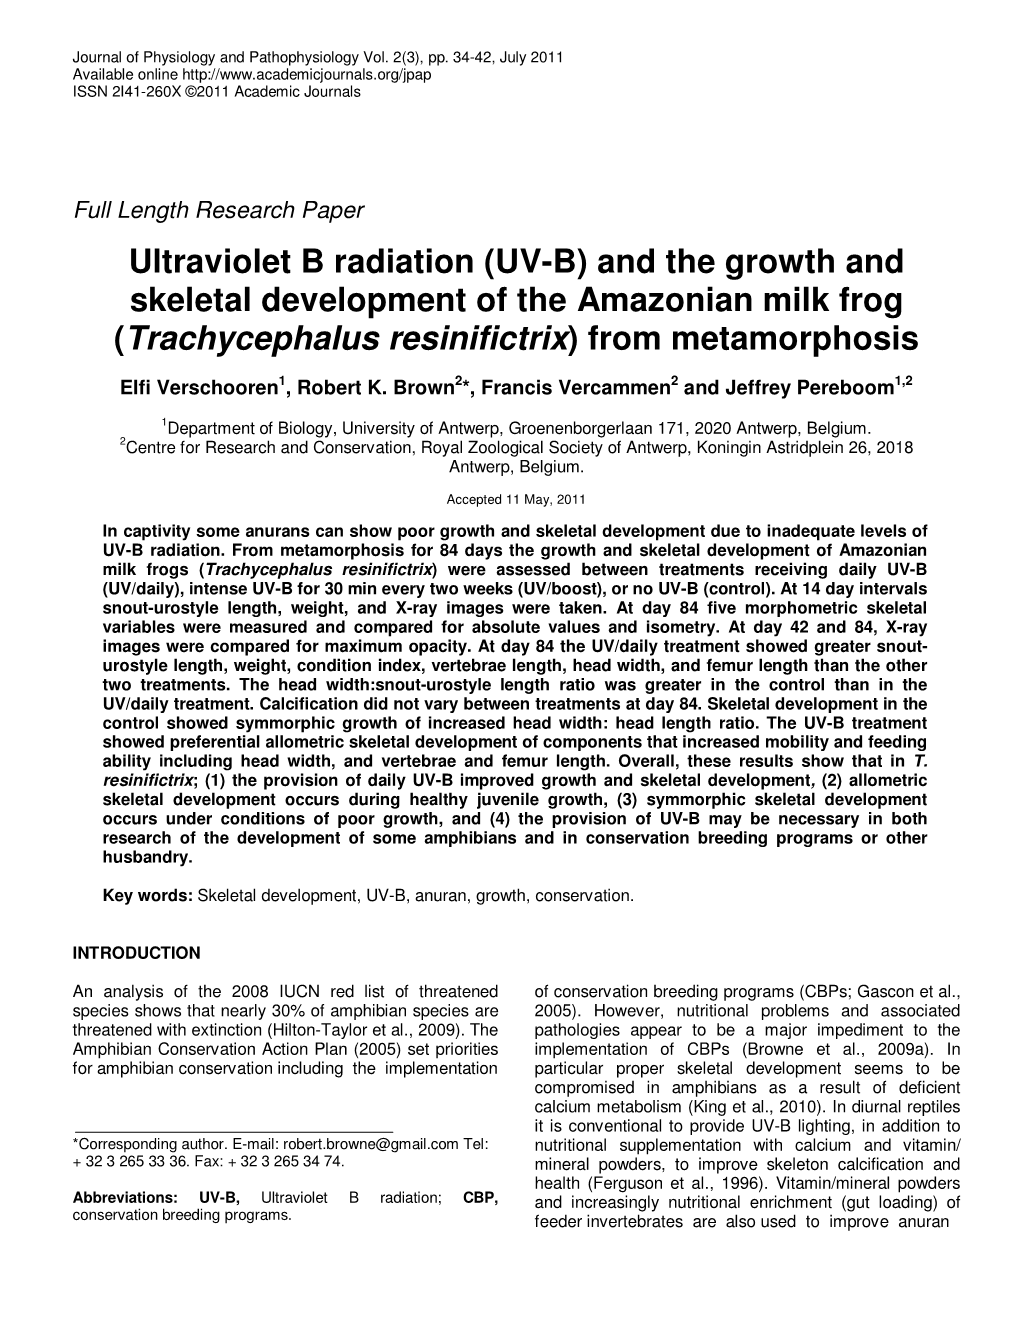 (UV-B) and the Growth and Skeletal Development of the Amazonian Milk Frog (Trachycephalus Resinifictrix ) from Metamorphosis